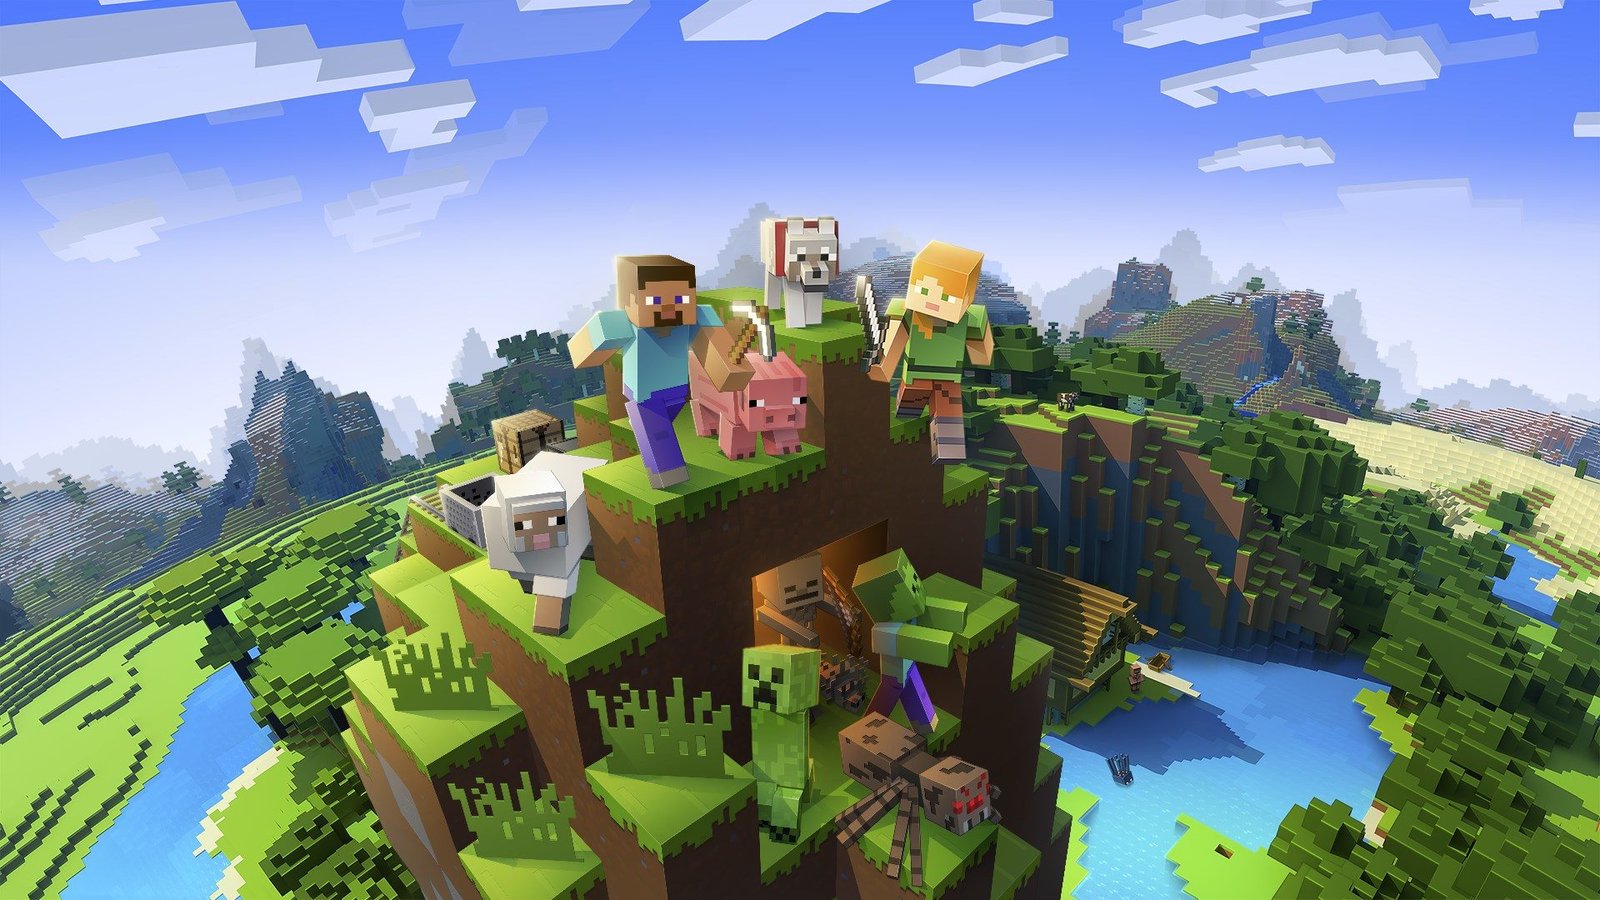 MINECRAFT was Released in November 2011. The game was created by MARKUS ‘NOTCH’ PRESSON. MOJANG STUDIO developed the game. The Publishers of this 